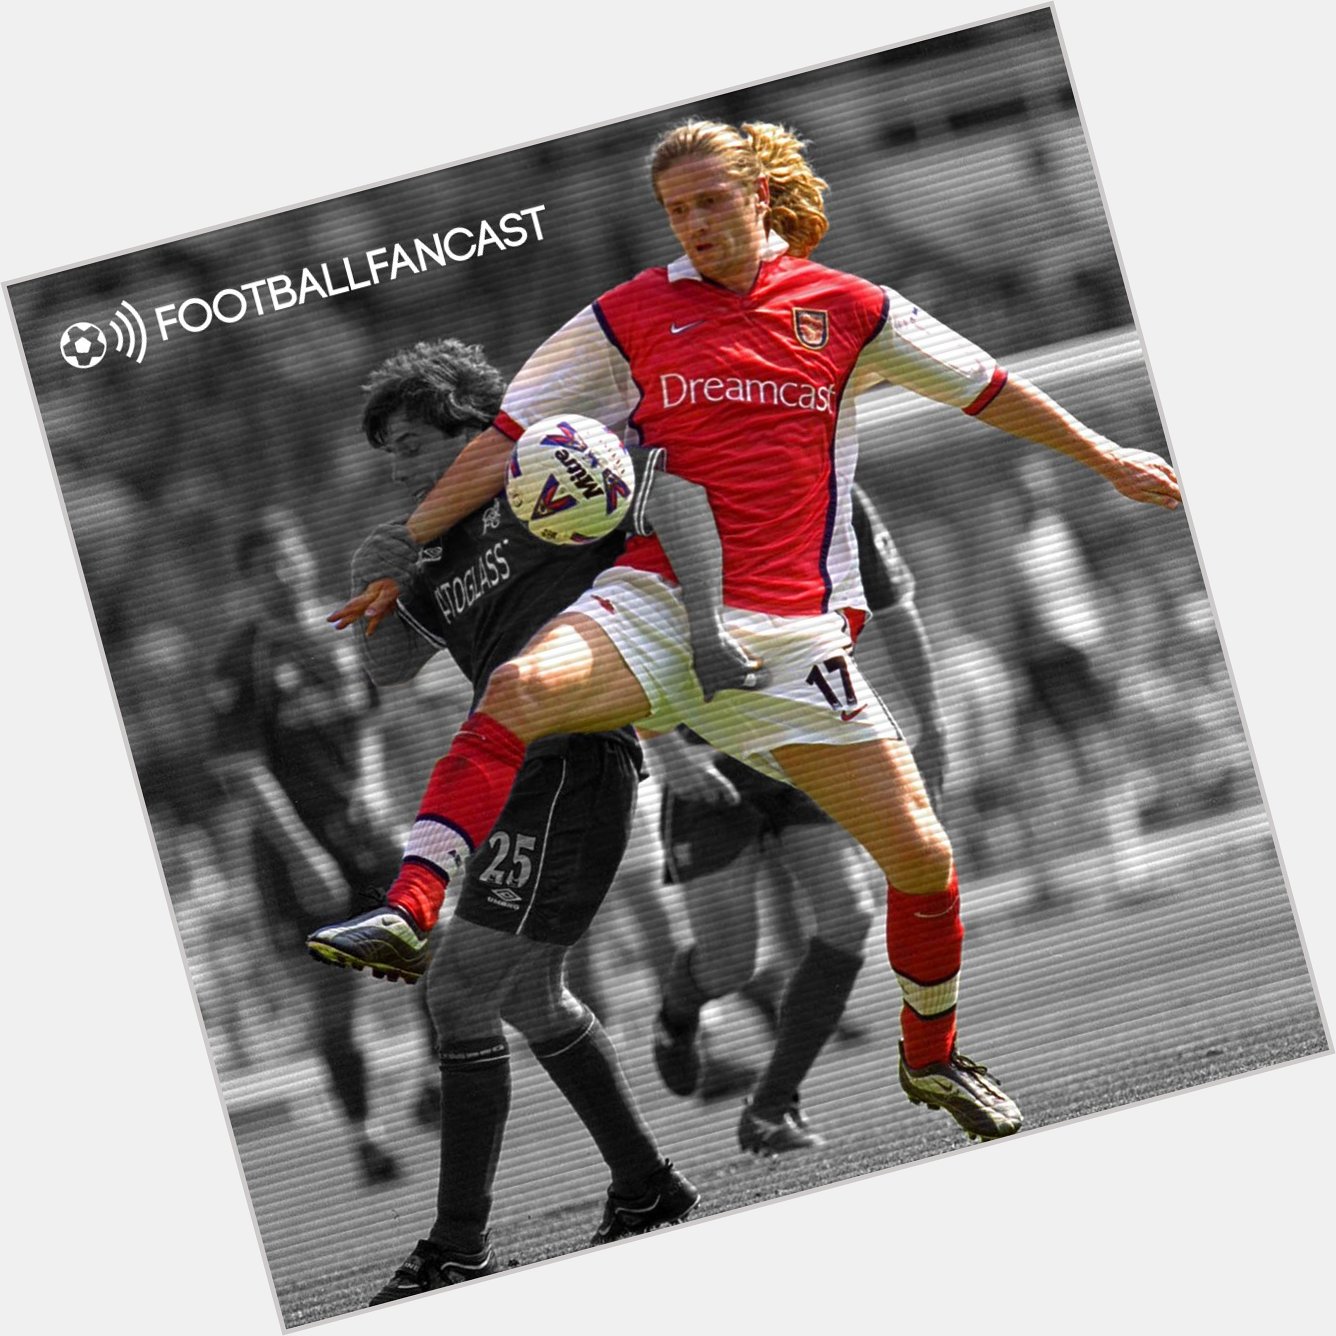  1998 World Cup winner  Scored in the final
4  trophies with Happy 47th Birthday Emmanuel Petit  